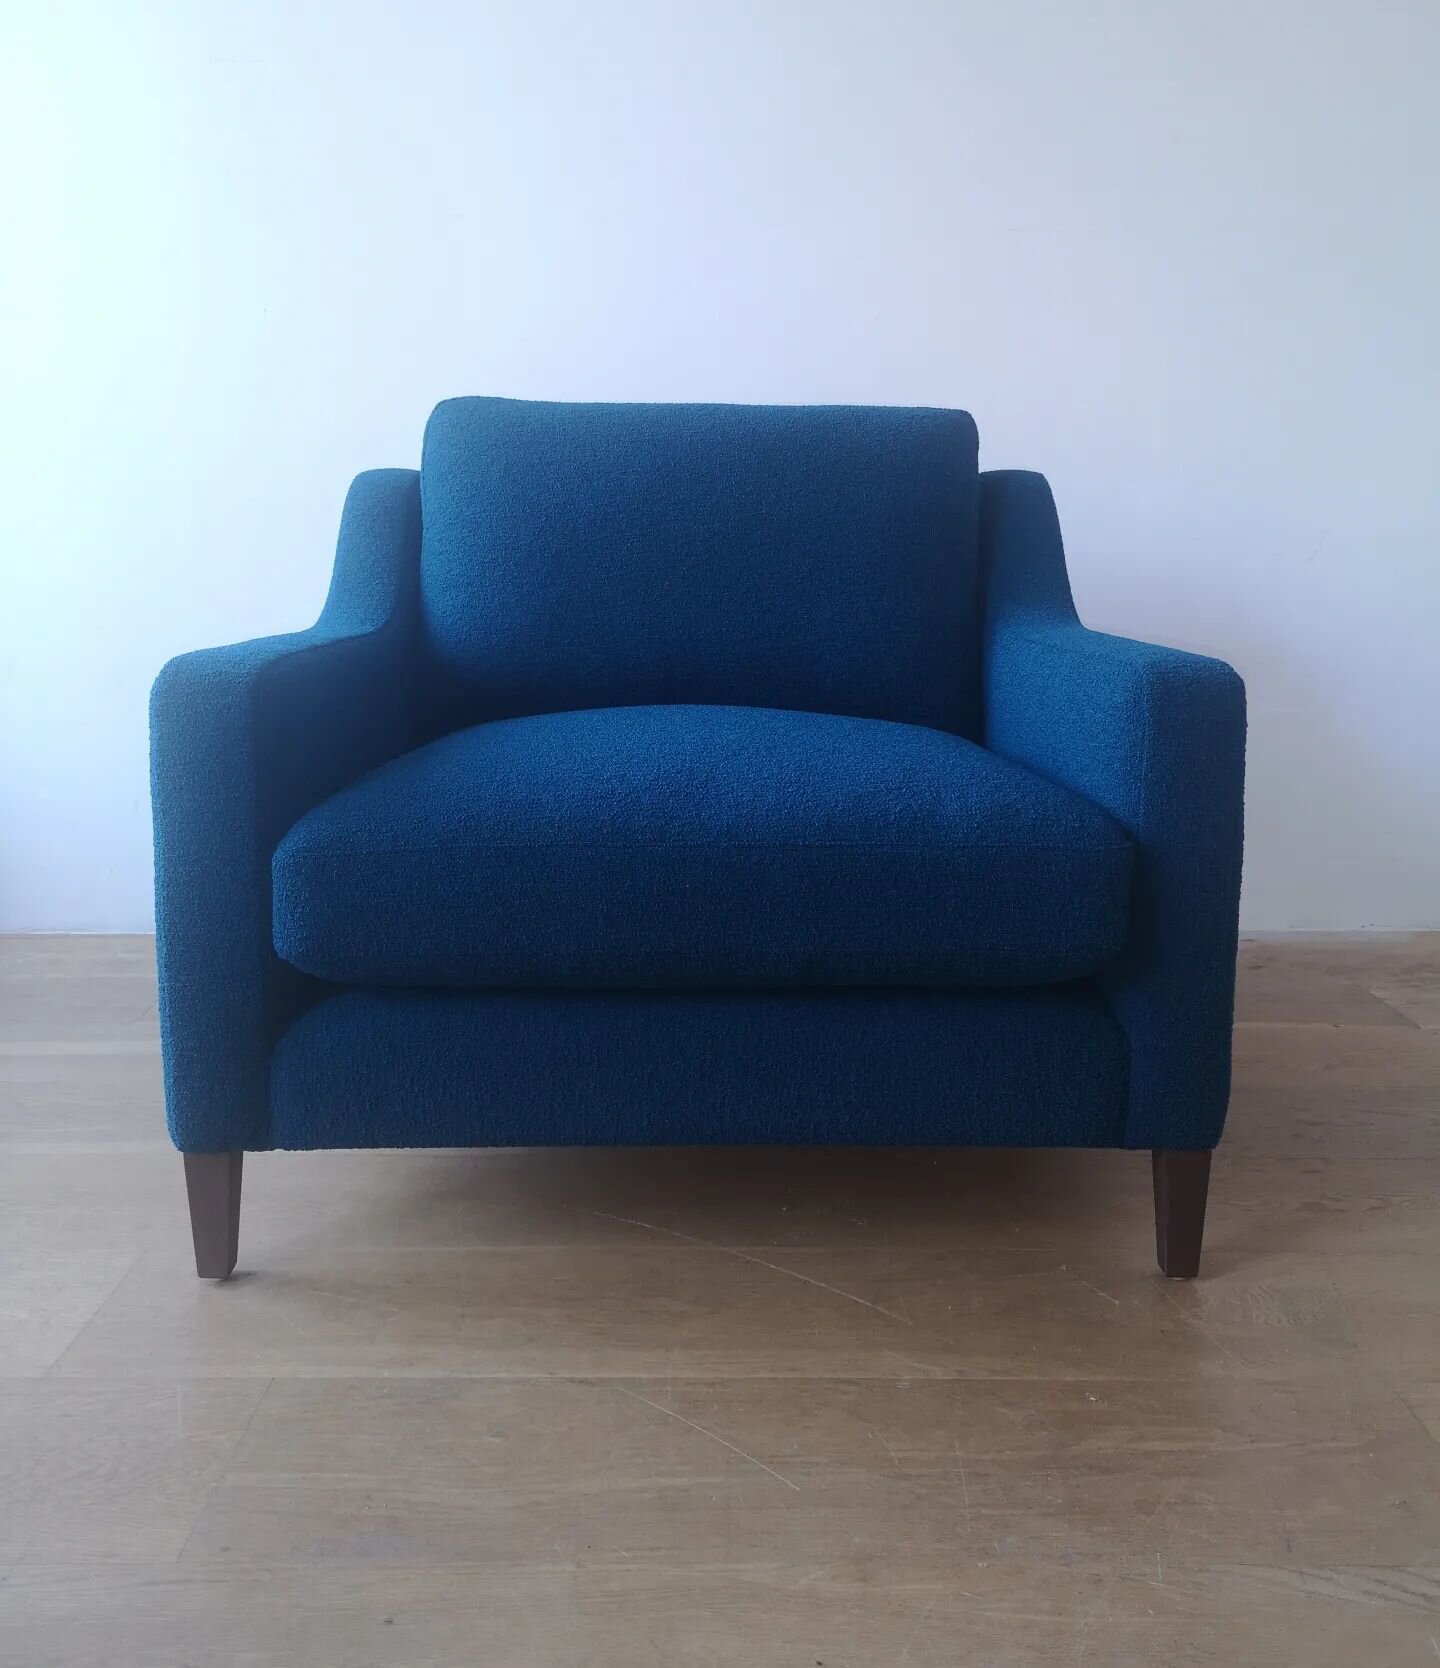 Be Seated New Georgian Armchair,with Walnut leg. Bespoke size manufactured for the client.
Upholstered in Bute Tiree fabric.

#upholsterymanufacture
#scottishfurnituremakers
#upholsterersofinstagram
#upholsteryedinburgh
#sofamanufacturerEdinburgh
#ch